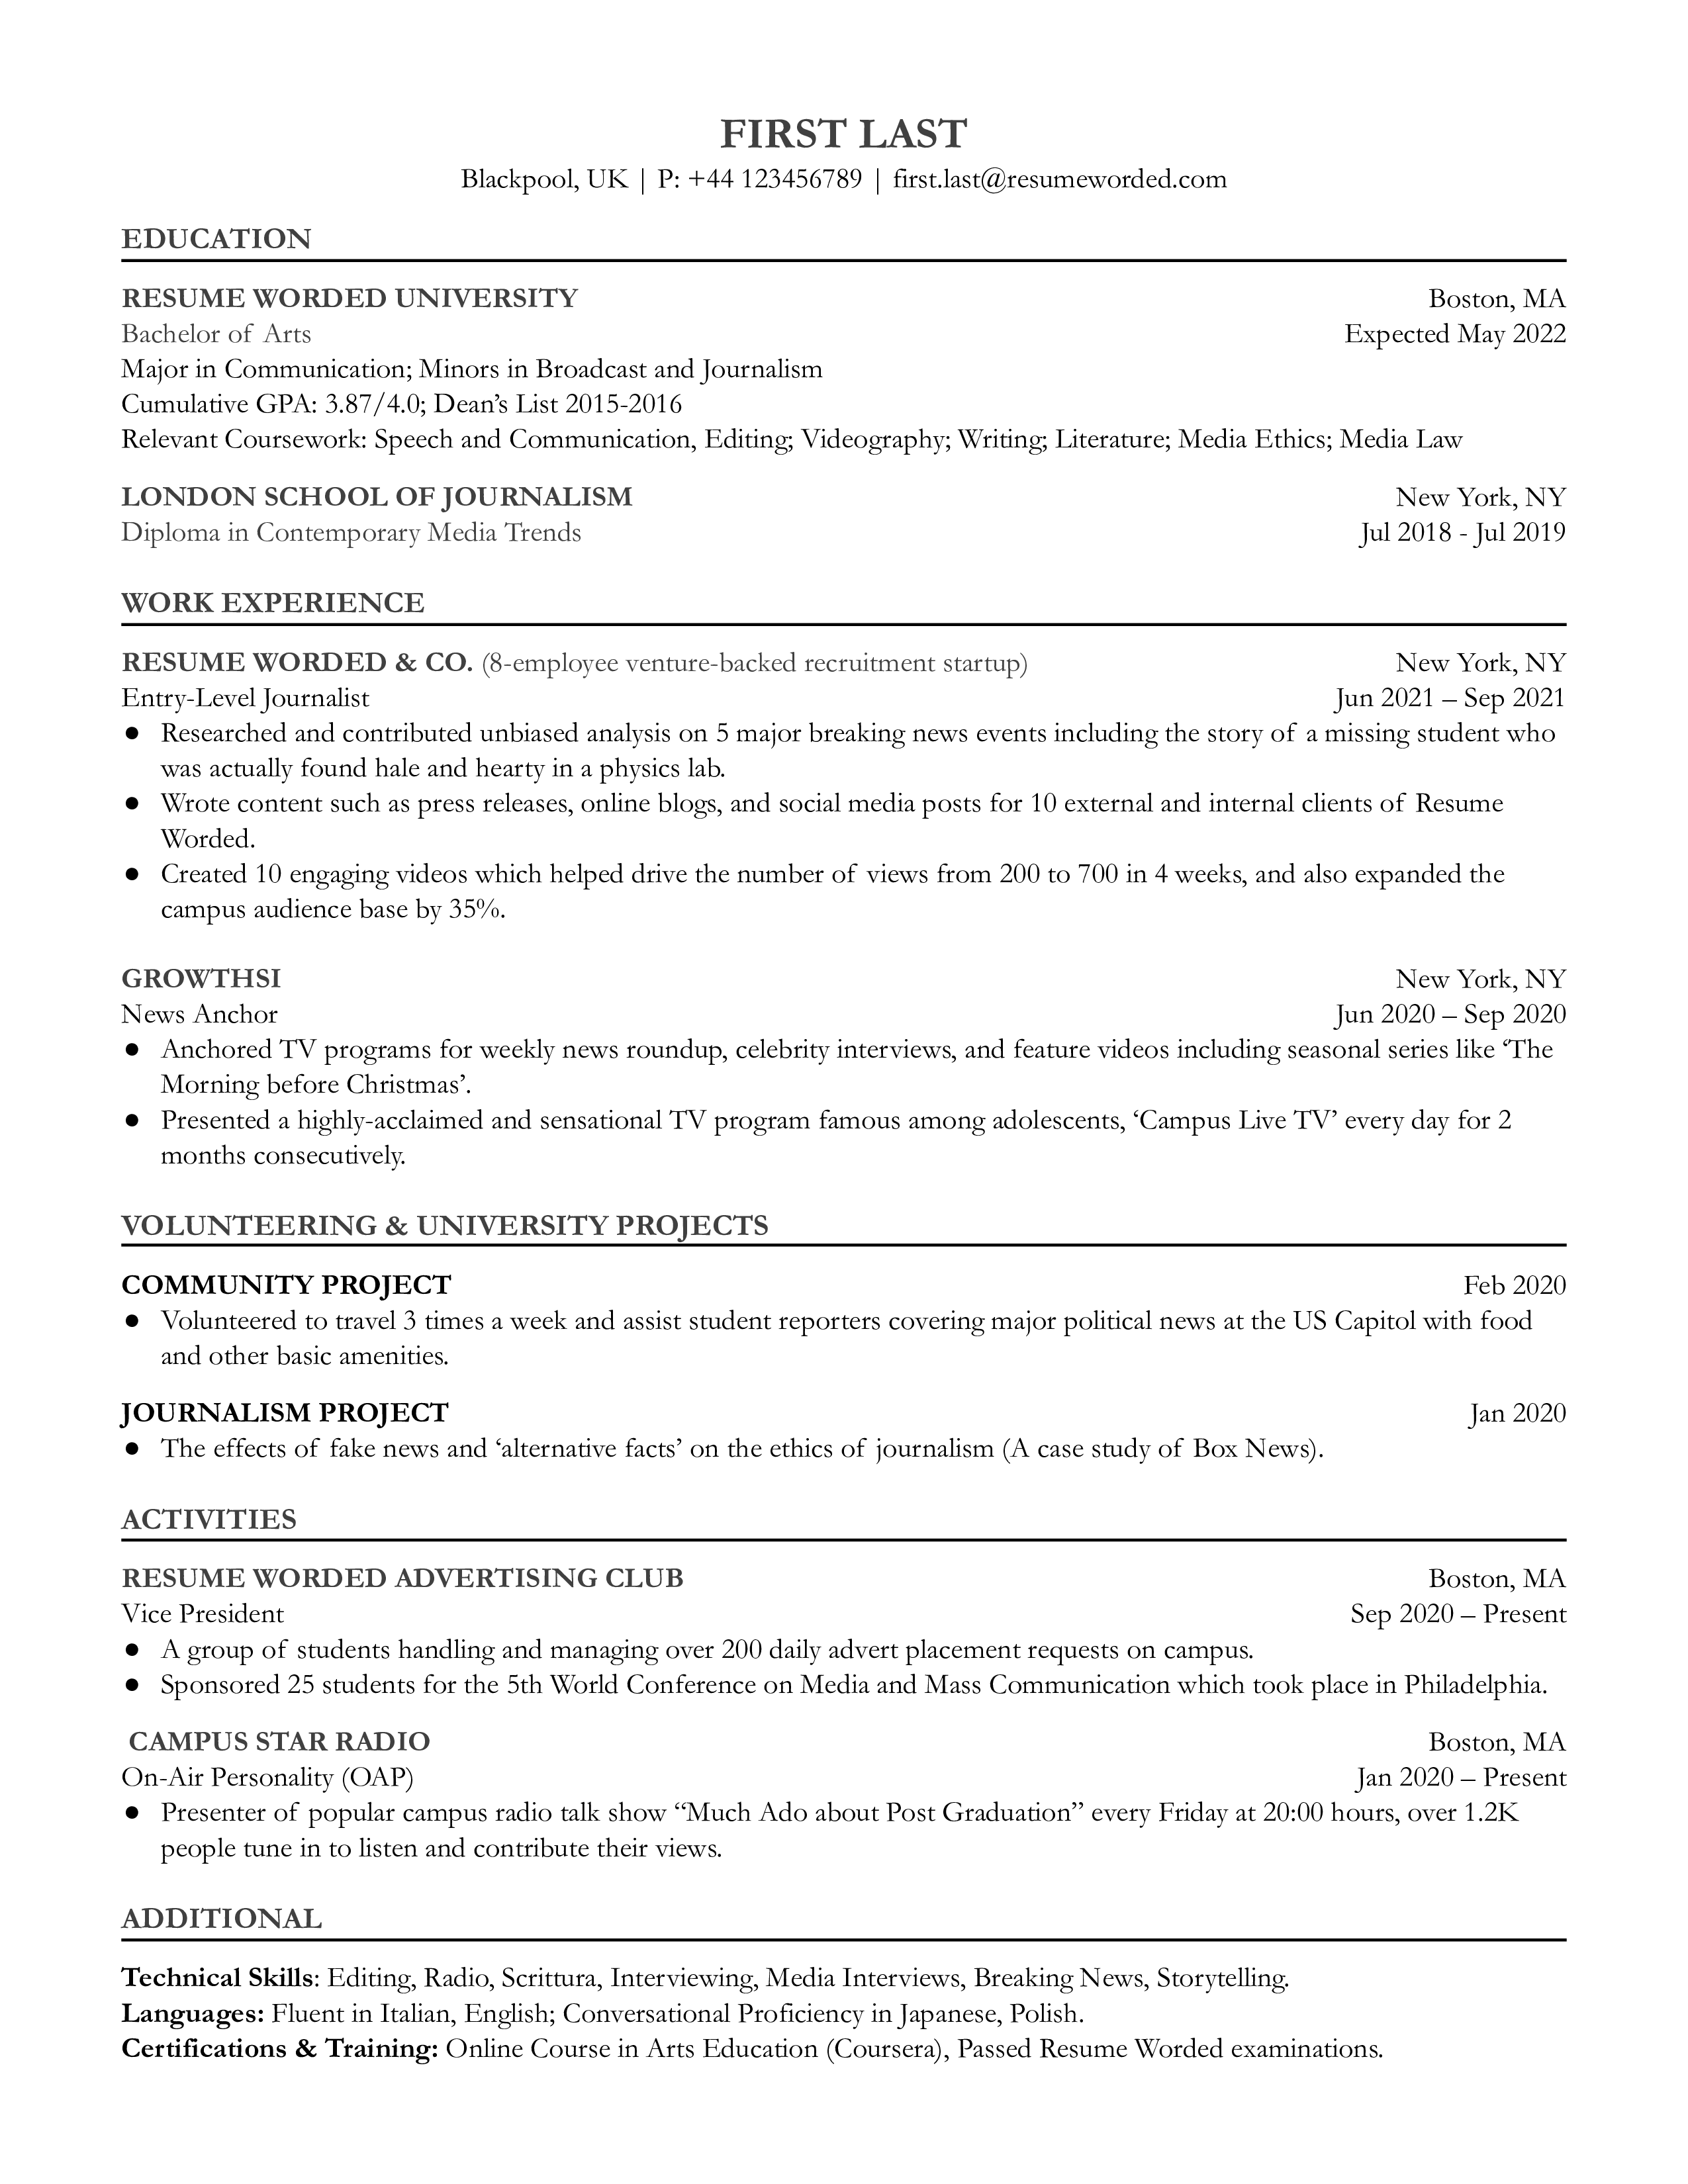 Entry level journalist resume sample that highlights the applicant's relevant college experience and training